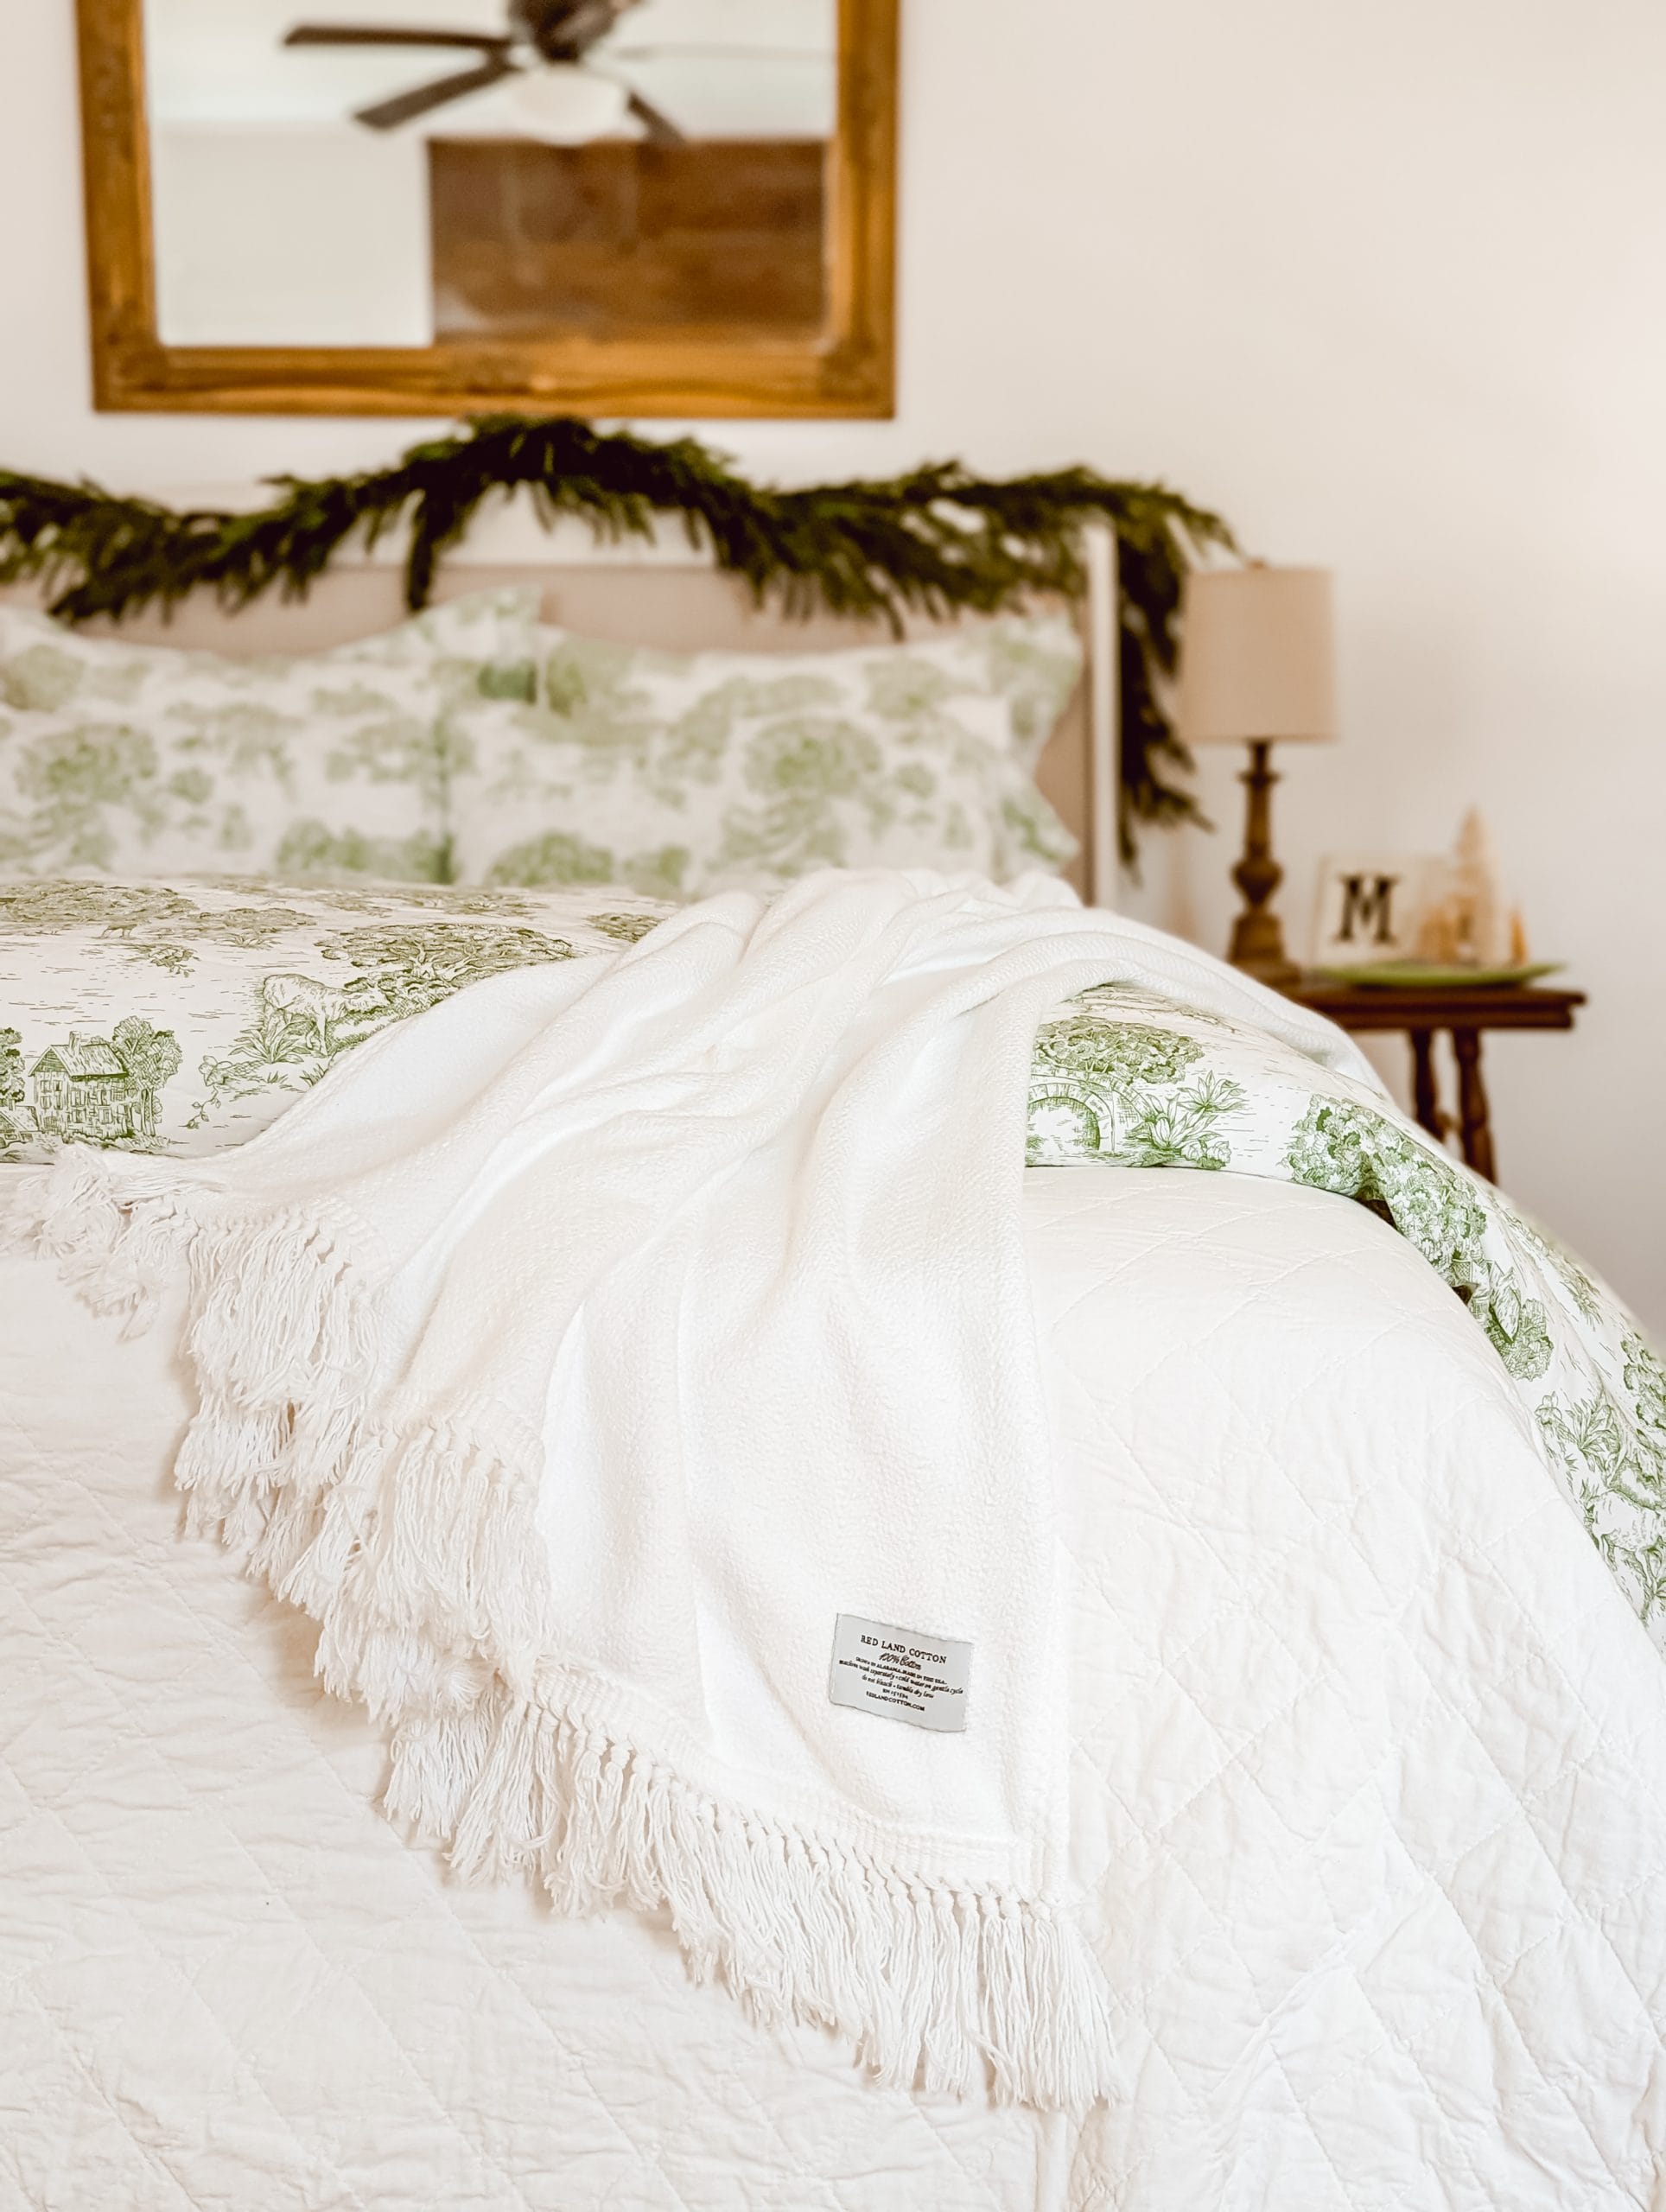 layers of green toile and white bedding from Red Land Cotton styled in a french country farmhouse bedroom for Christmas